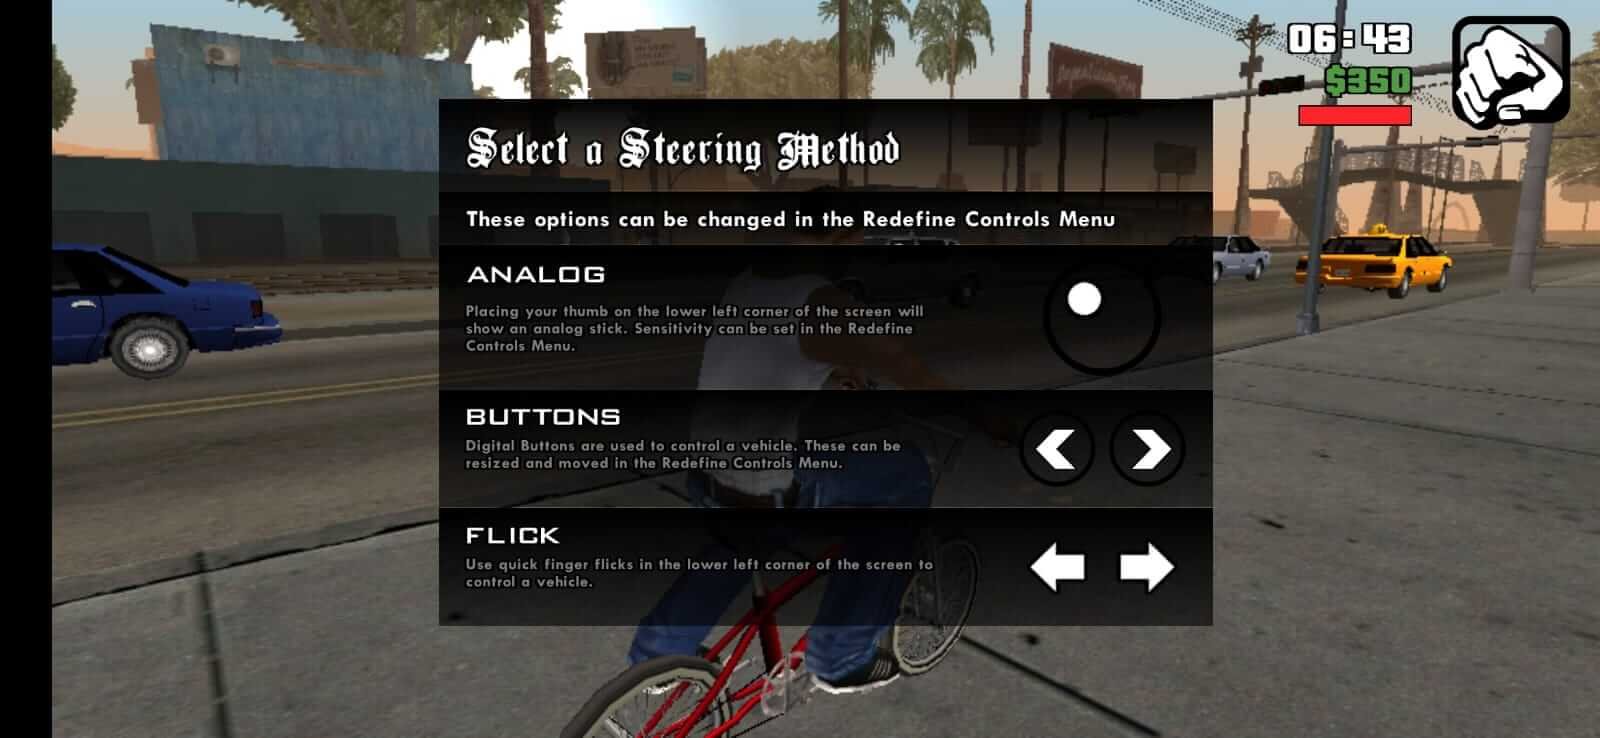 GTA San Andreas for Android APK + Obb Free Download - TechyPatcher